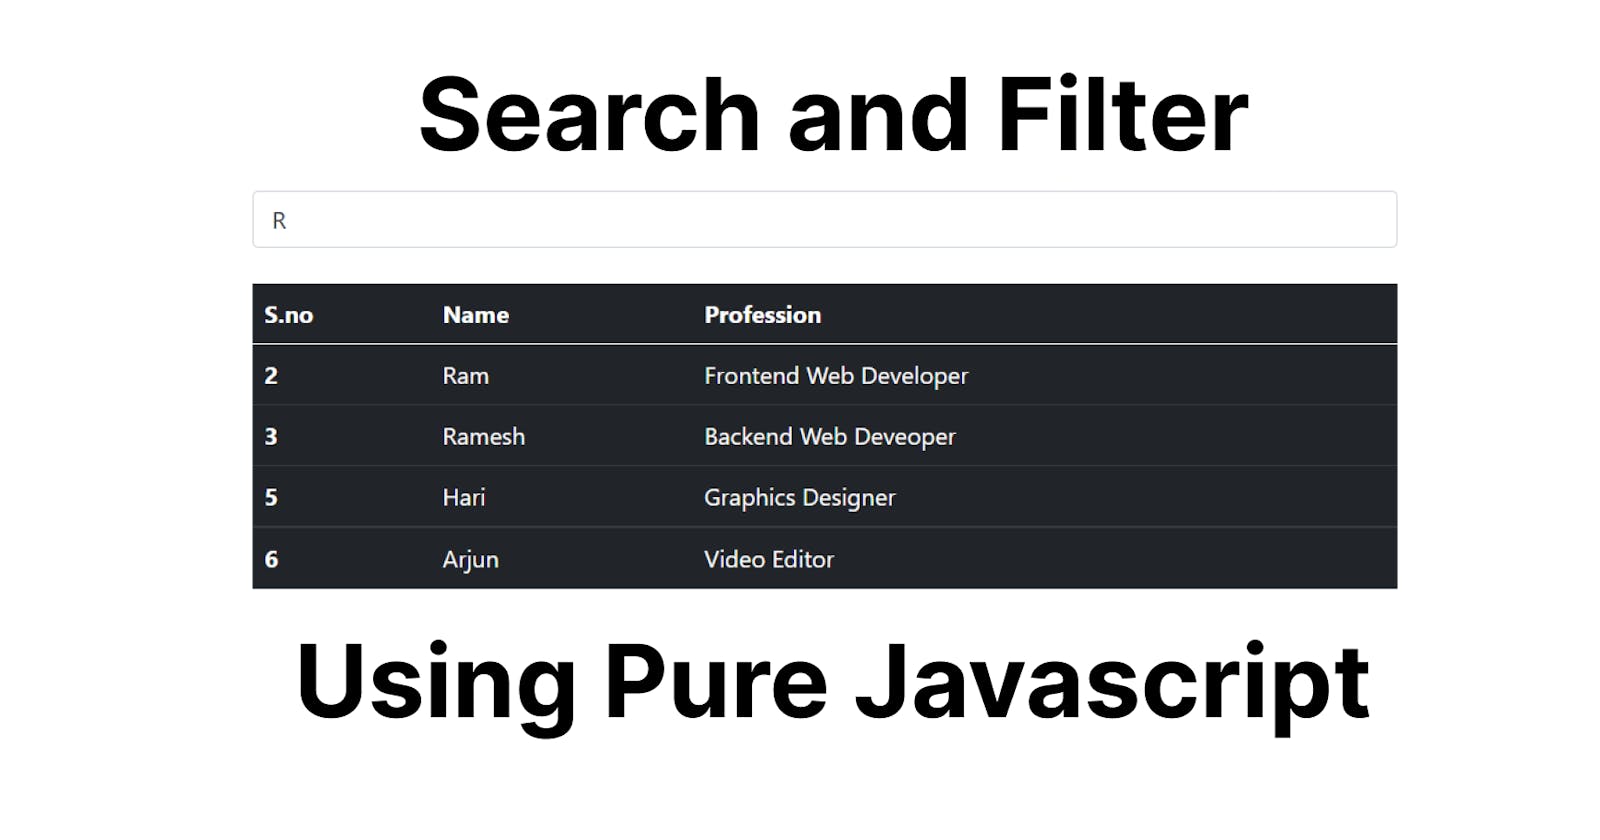 Search and Filter items of table using pure JavaScript.